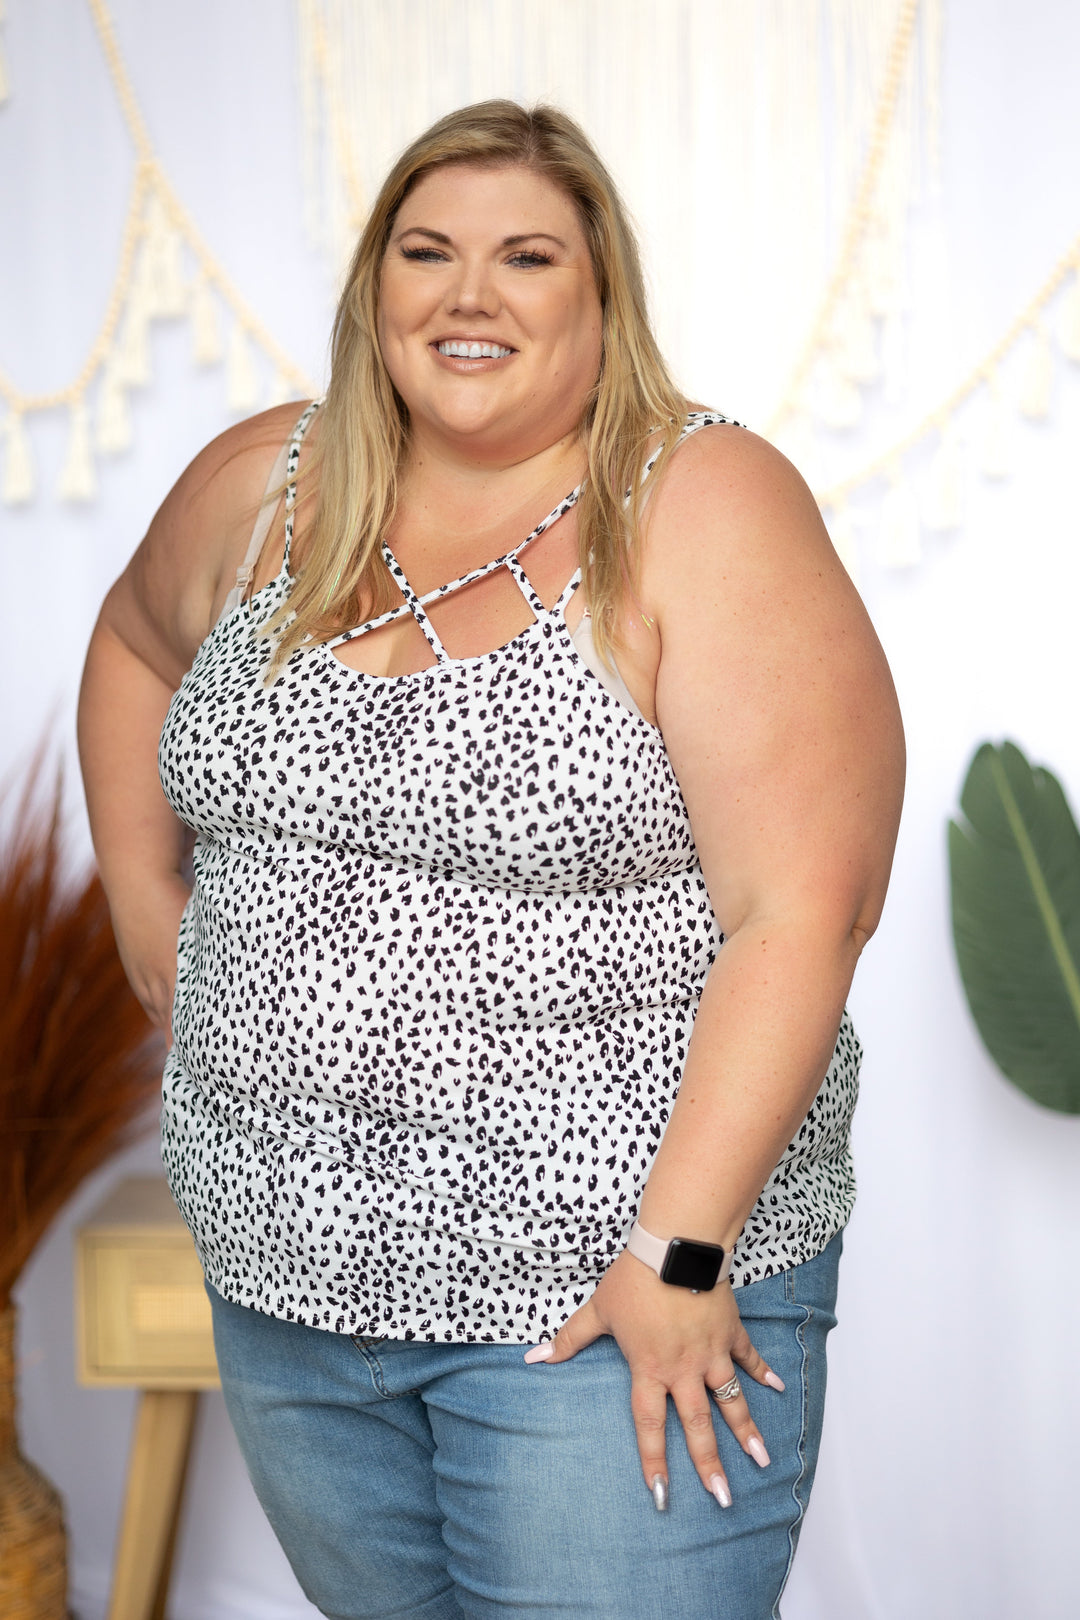 Speckled Sleeveless Top